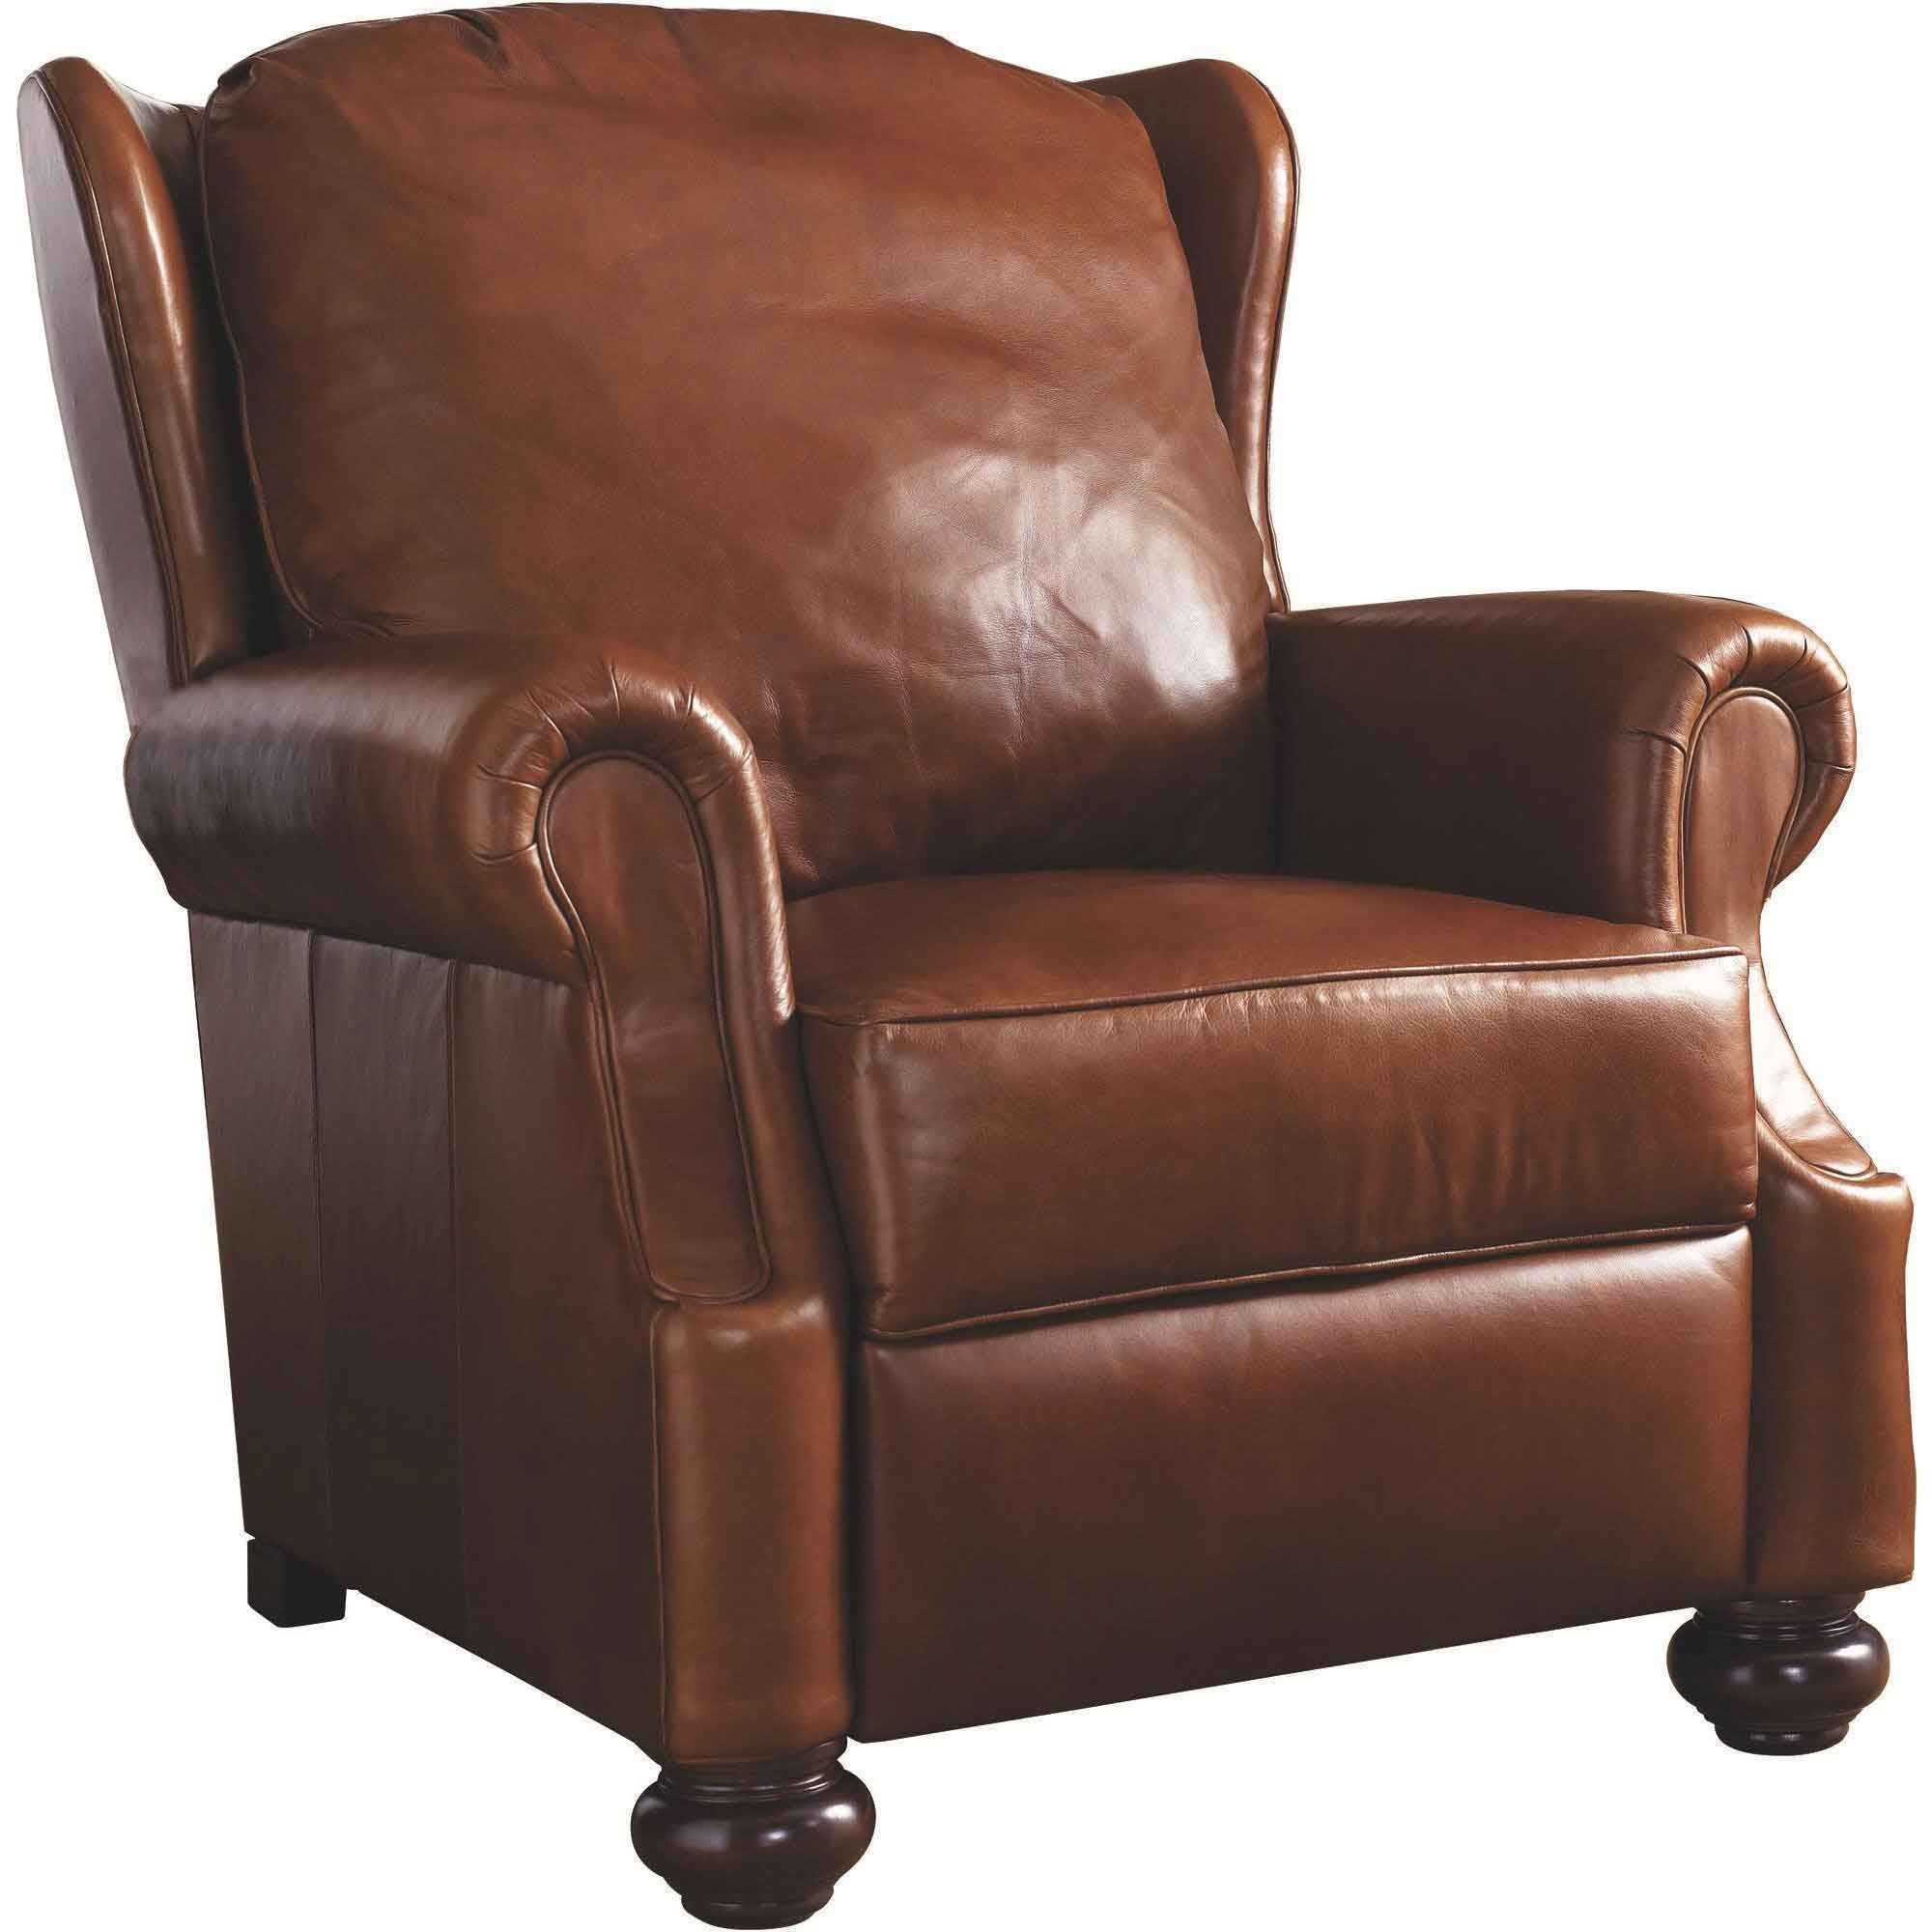 4 Biggest Problems with Manual Reclining Furniture